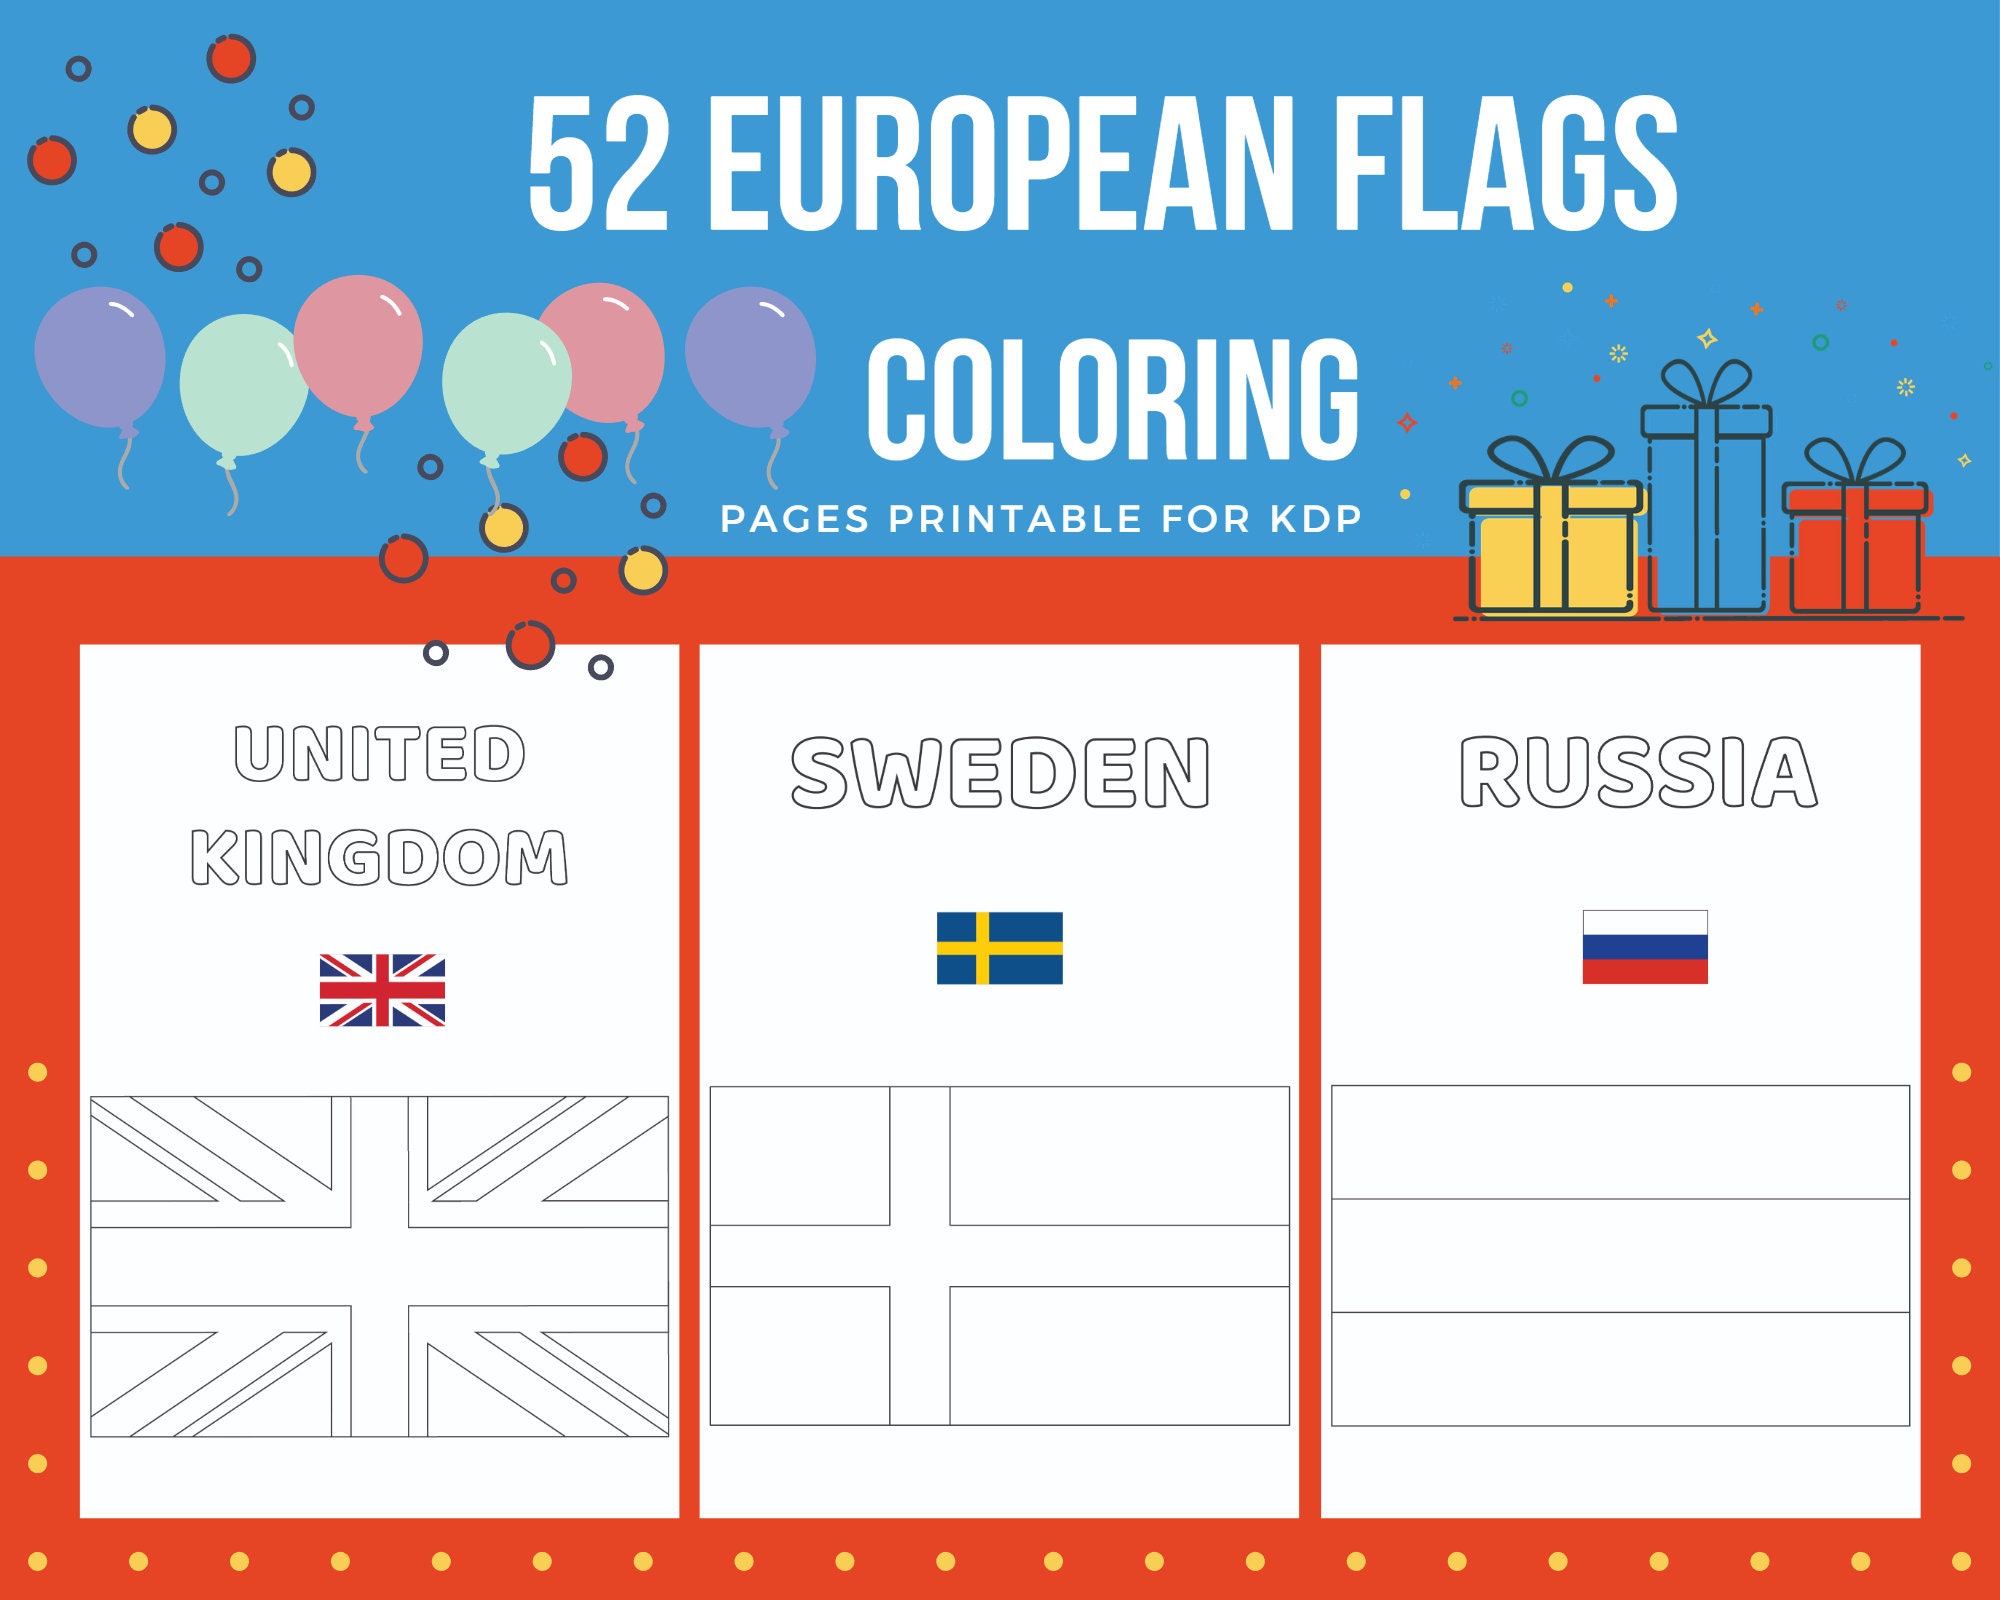 European flags coloring pages printable for kids pdf file us letter instant download kdp coloring book for kids